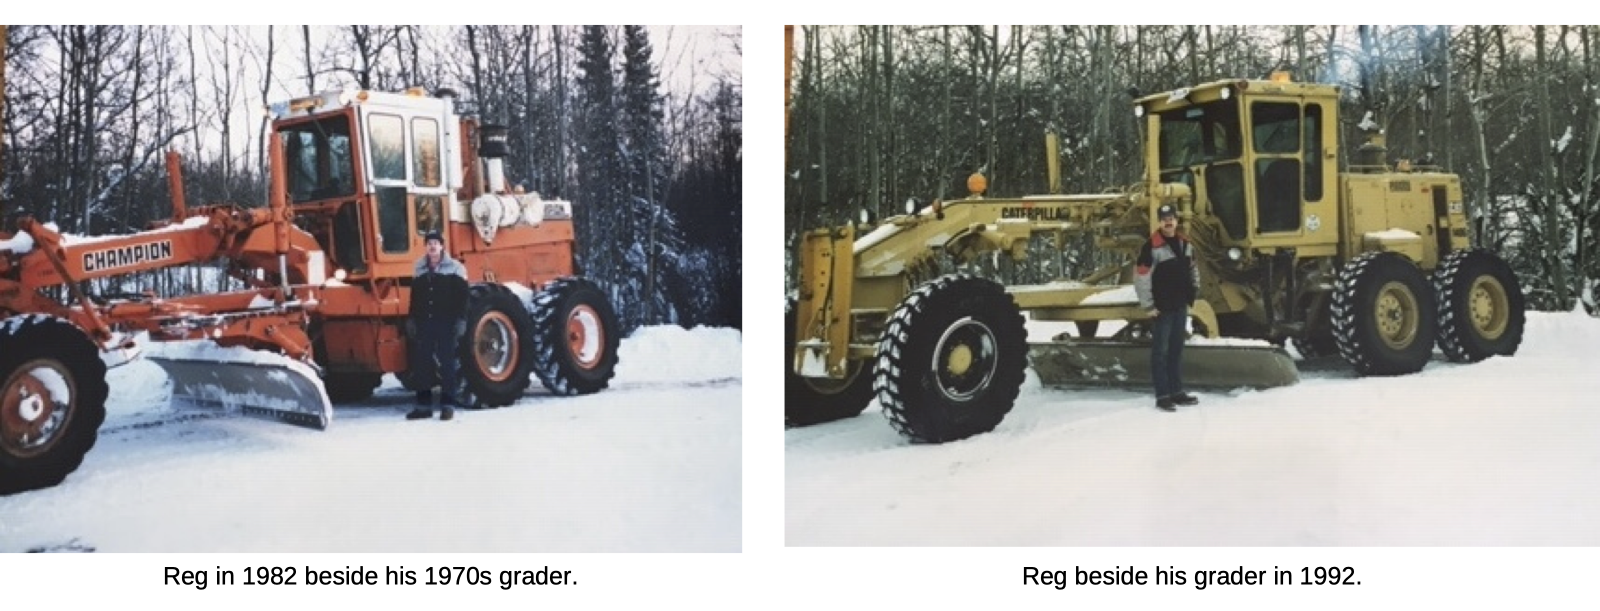 Image 1 - Reg standing next to the 1970s grader he operated in 1982, Image 2 - Reg standing next to his grader in 1992